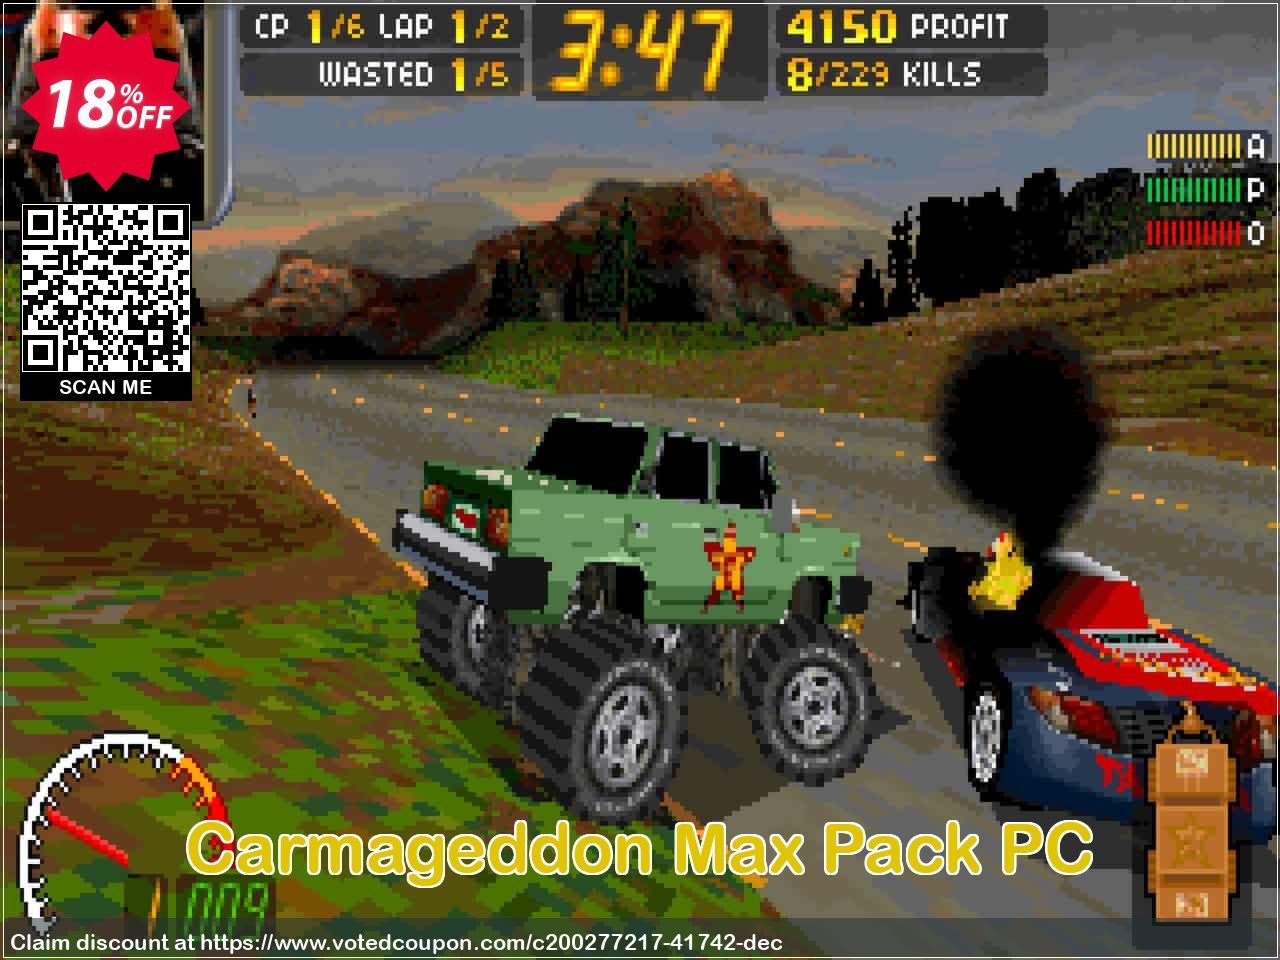 Carmageddon Max Pack PC voted-on promotion codes